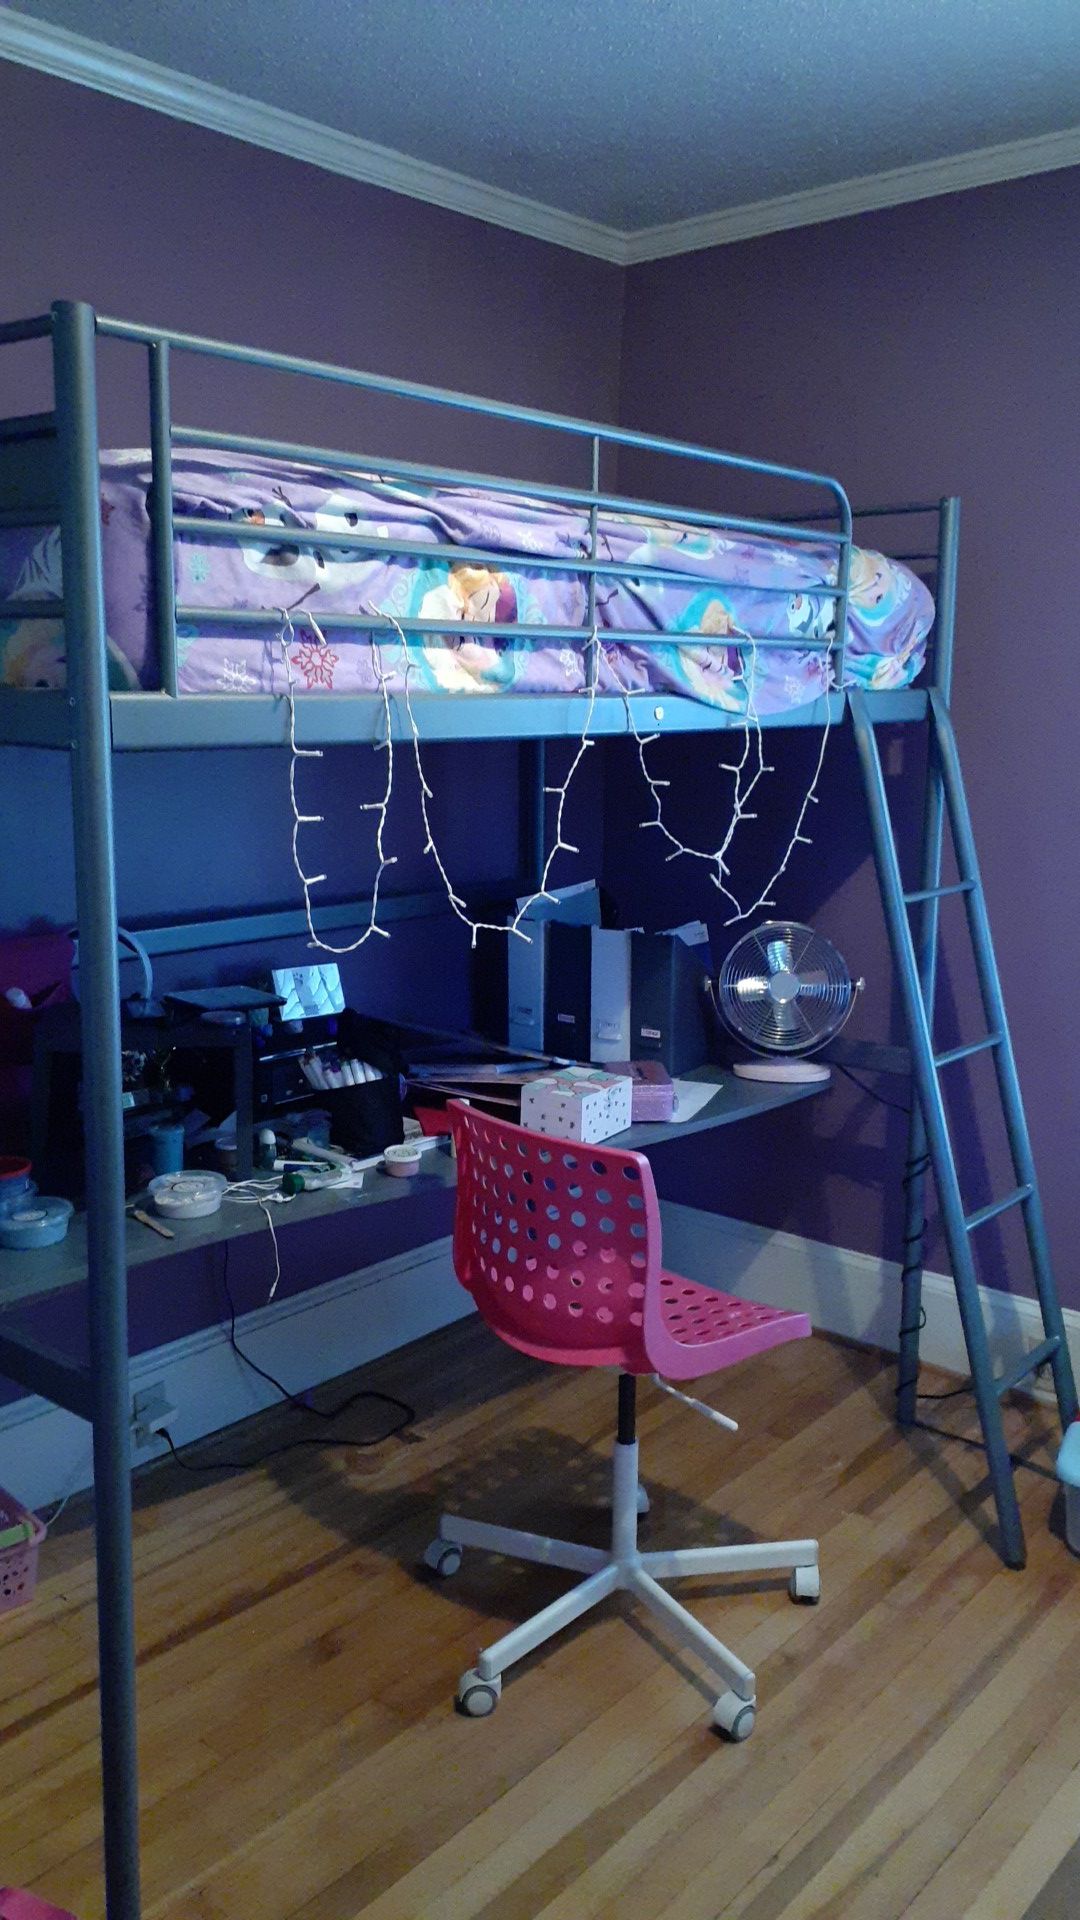 IKEA bunk bed frame with desk